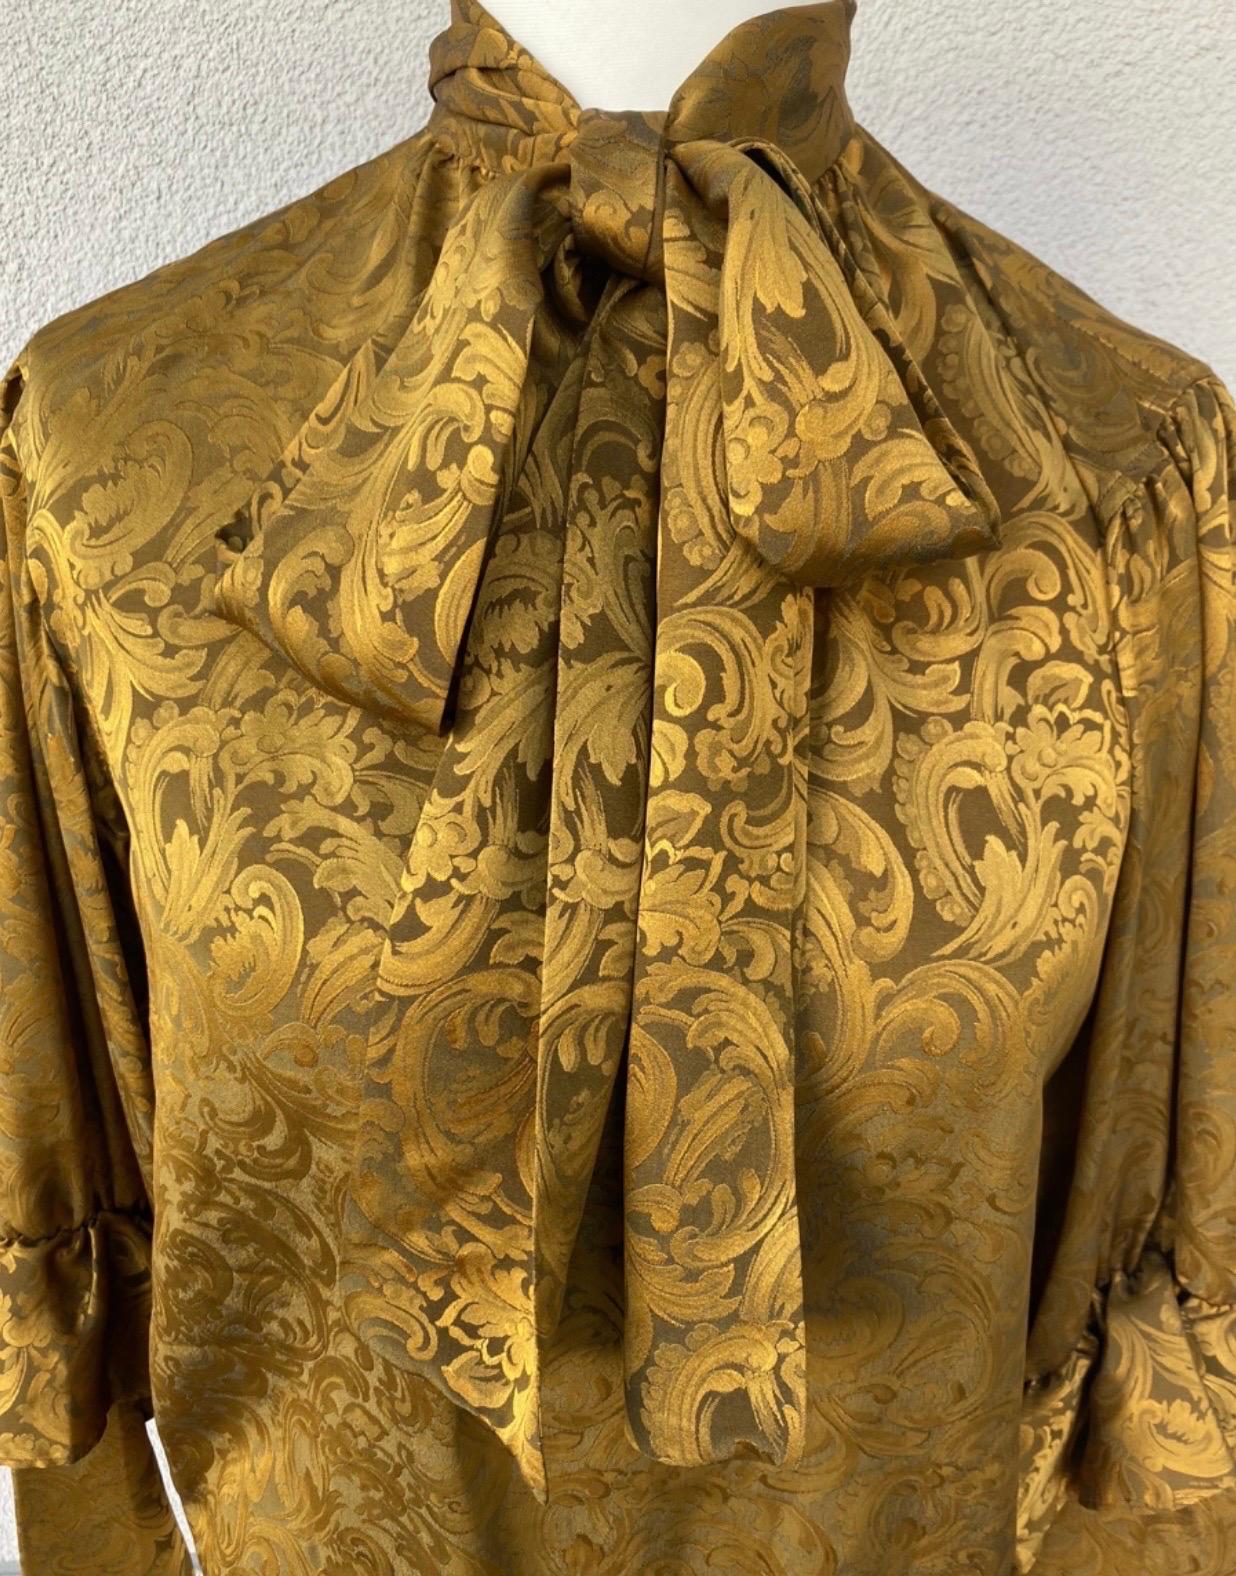 Yves saint Laurent shirt. Vintage piece.
In golden silk with baroque pattern.
French size 36 which corresponds to an Italian 40 but fits like a 42.
measurements:
shoulders 43 cm
bust 50 cm
length 59 cm
sleeve 67 cm
in very good condition. Small